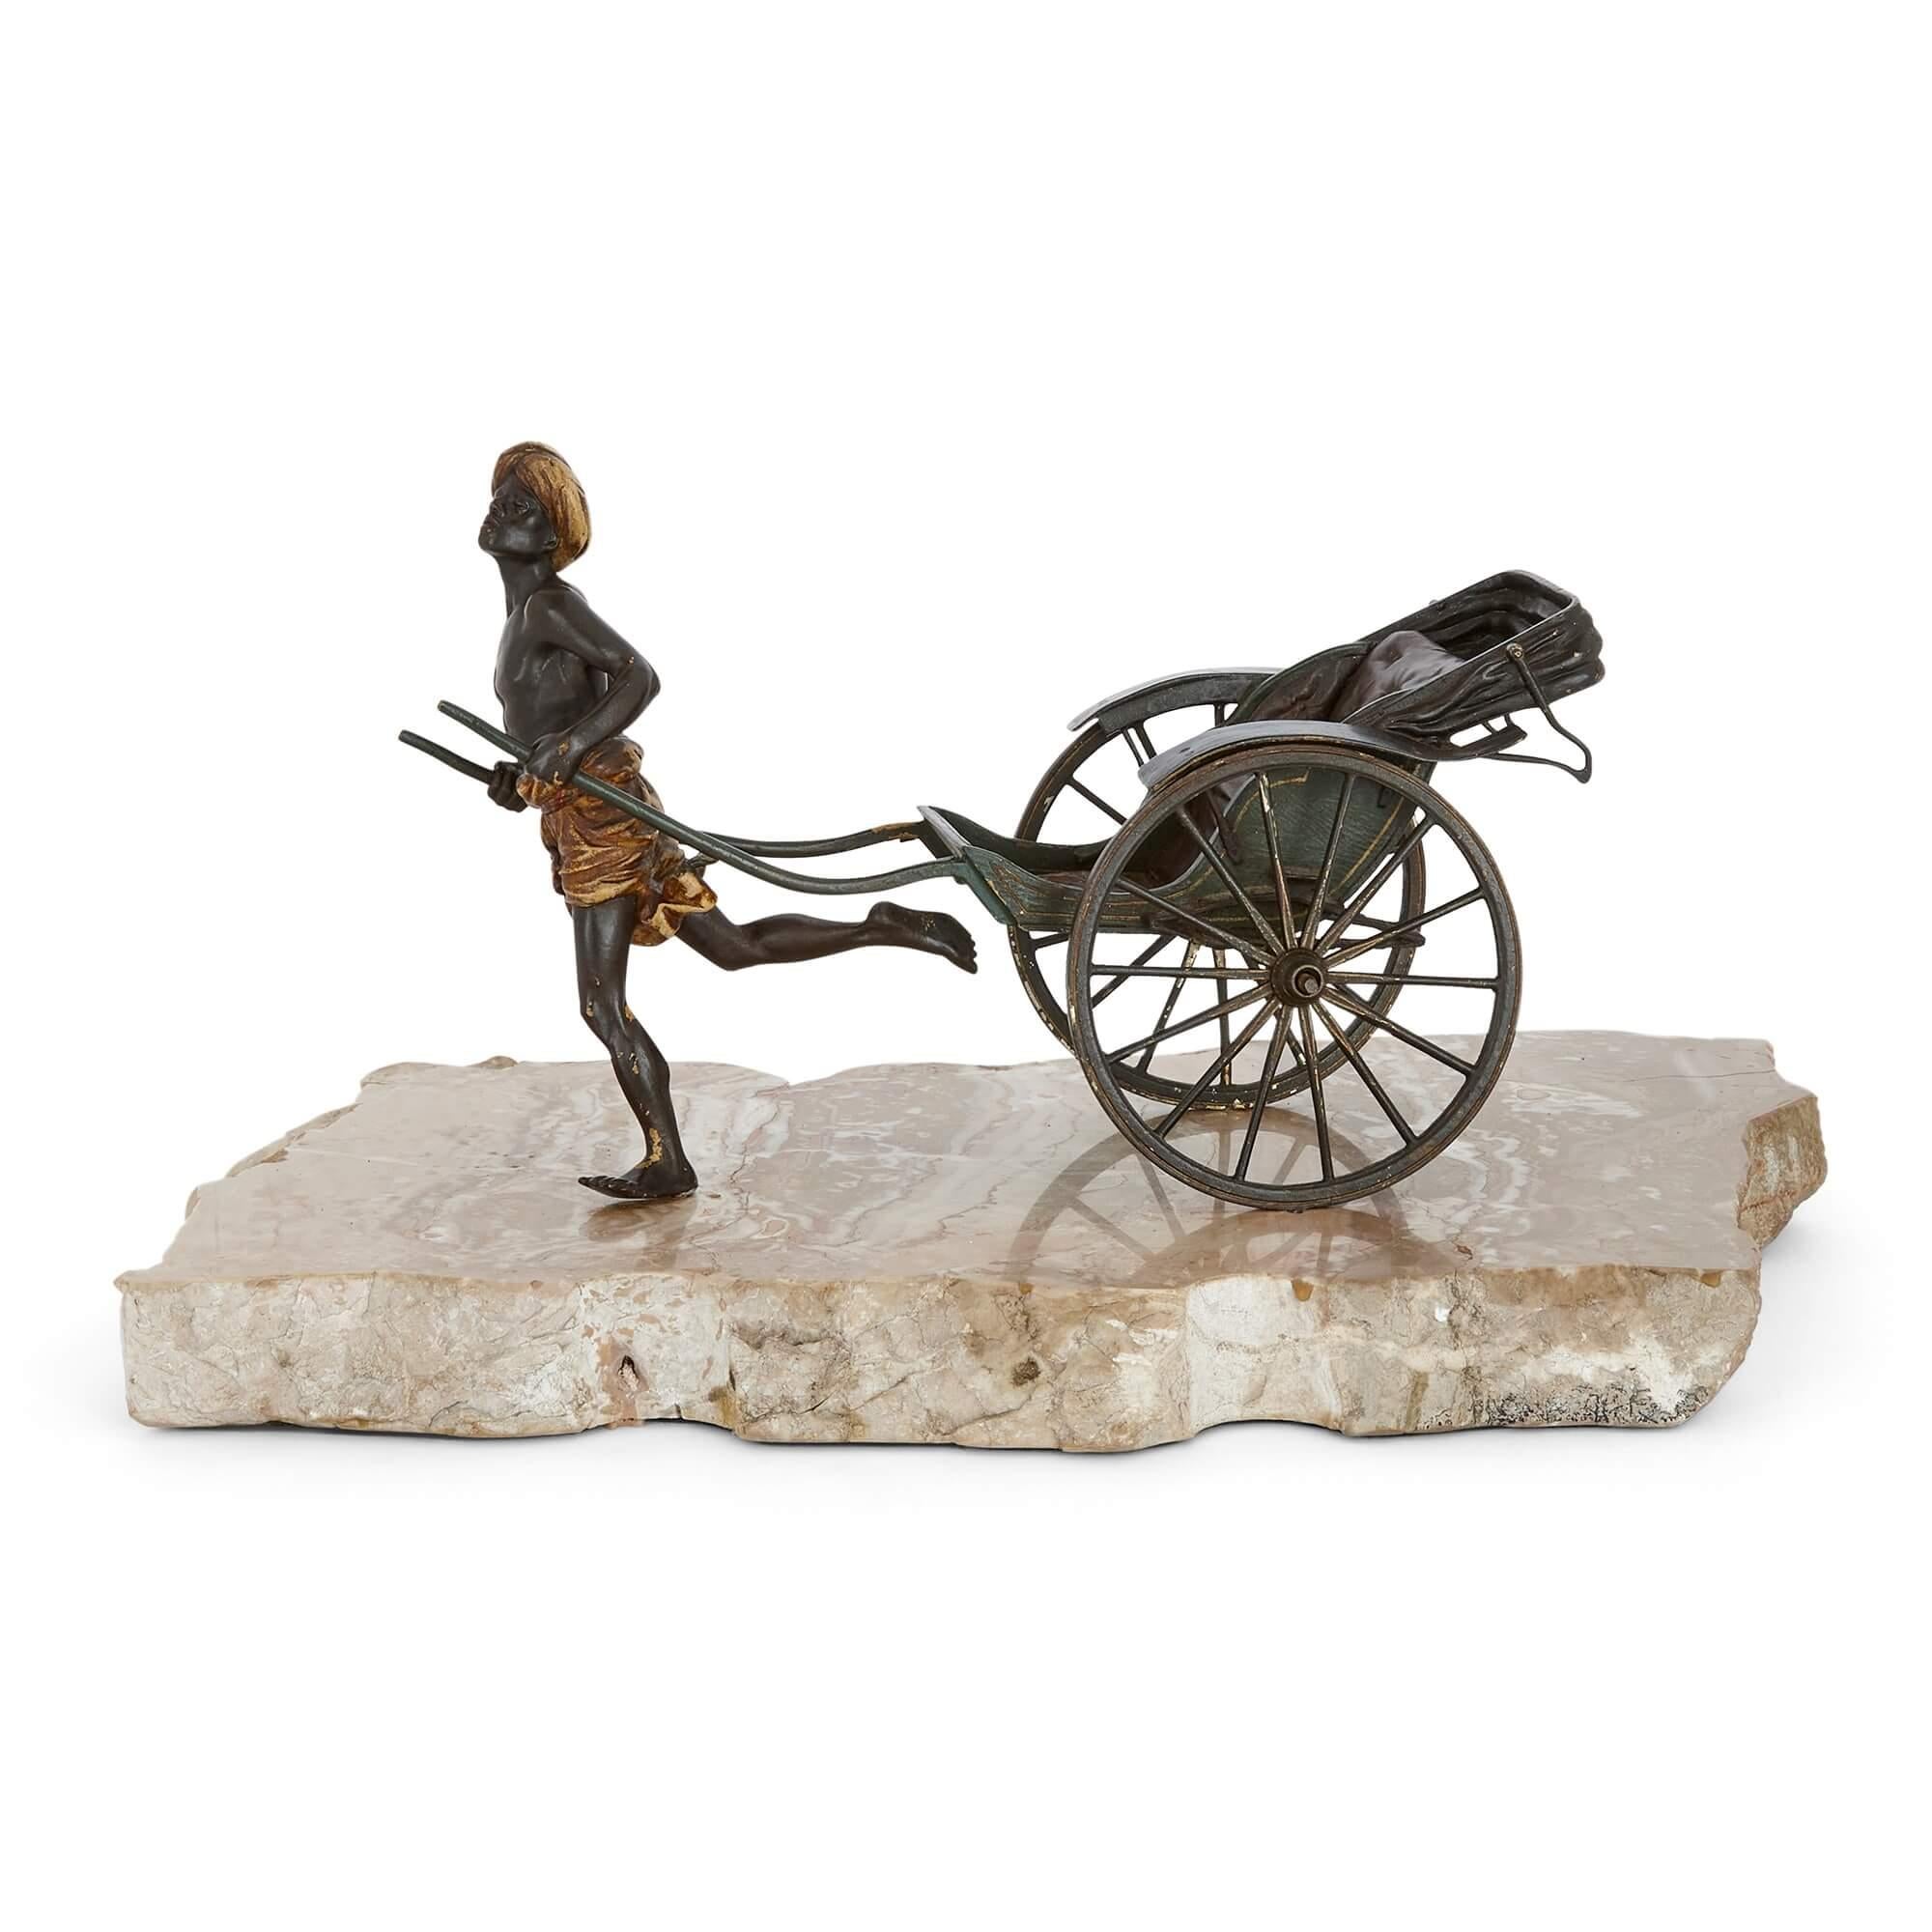 Antique cold-painted bronze of a pulled rickshaw by Bergman 
Austrian, c. 1910
Height 19cm, width 37cm, depth 20cm

This unusual cold-painted bronze depicts a running Arab man, who pulls an old-fashioned rickshaw cart behind him. The figure is